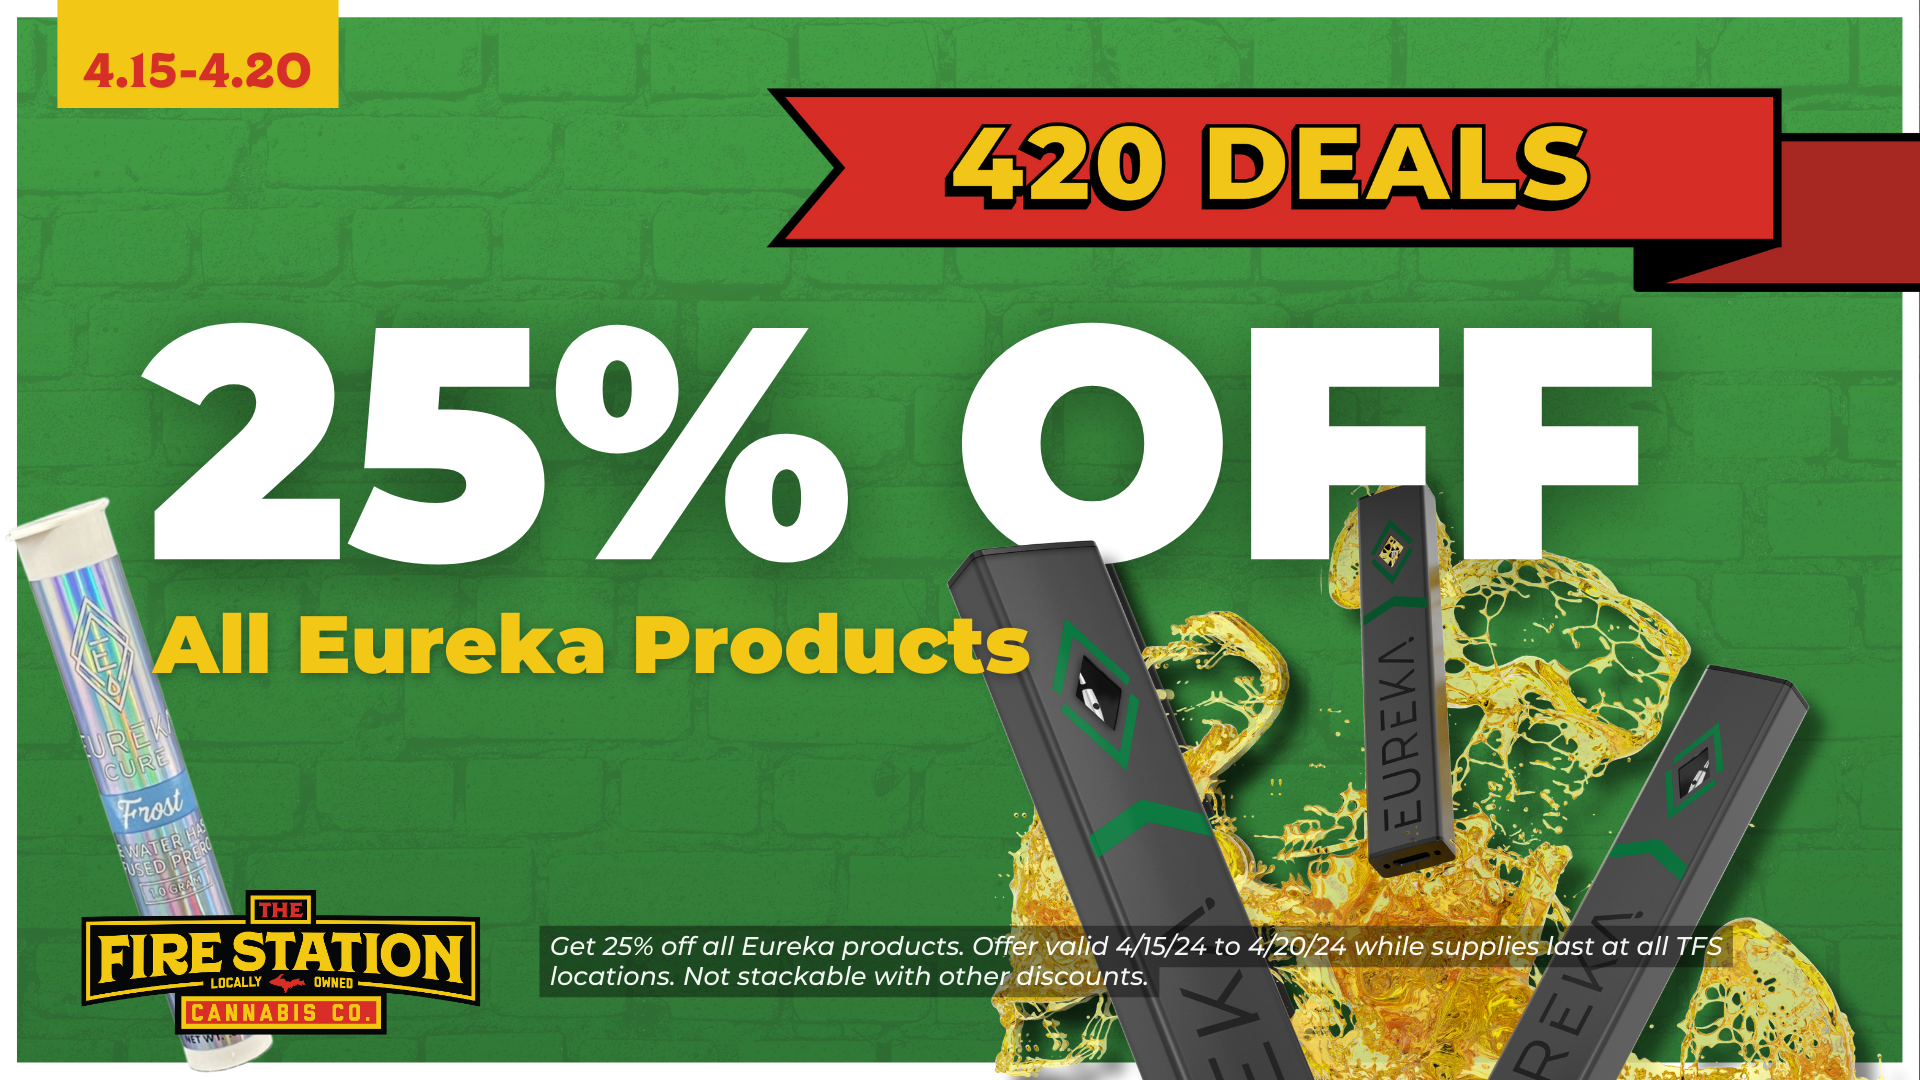 Get 25% off all Eureka products. Offer valid 4/15/24 to 4/20/24 while supplies last at all TFS locations. Not stackable with other discounts.